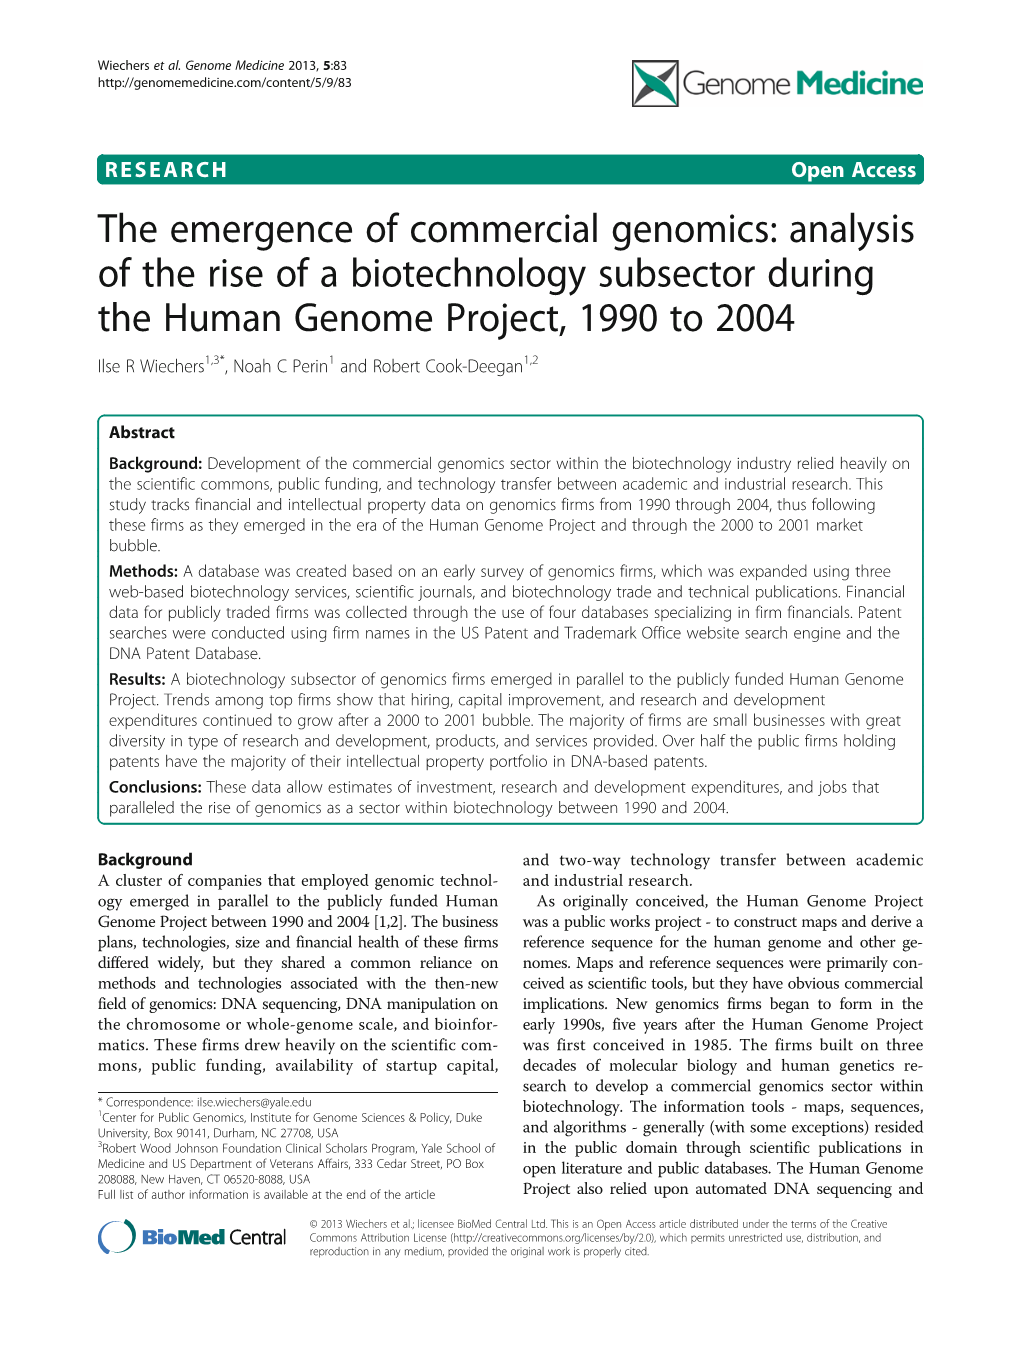 The Emergence of Commercial Genomics: Analysis of the Rise of A